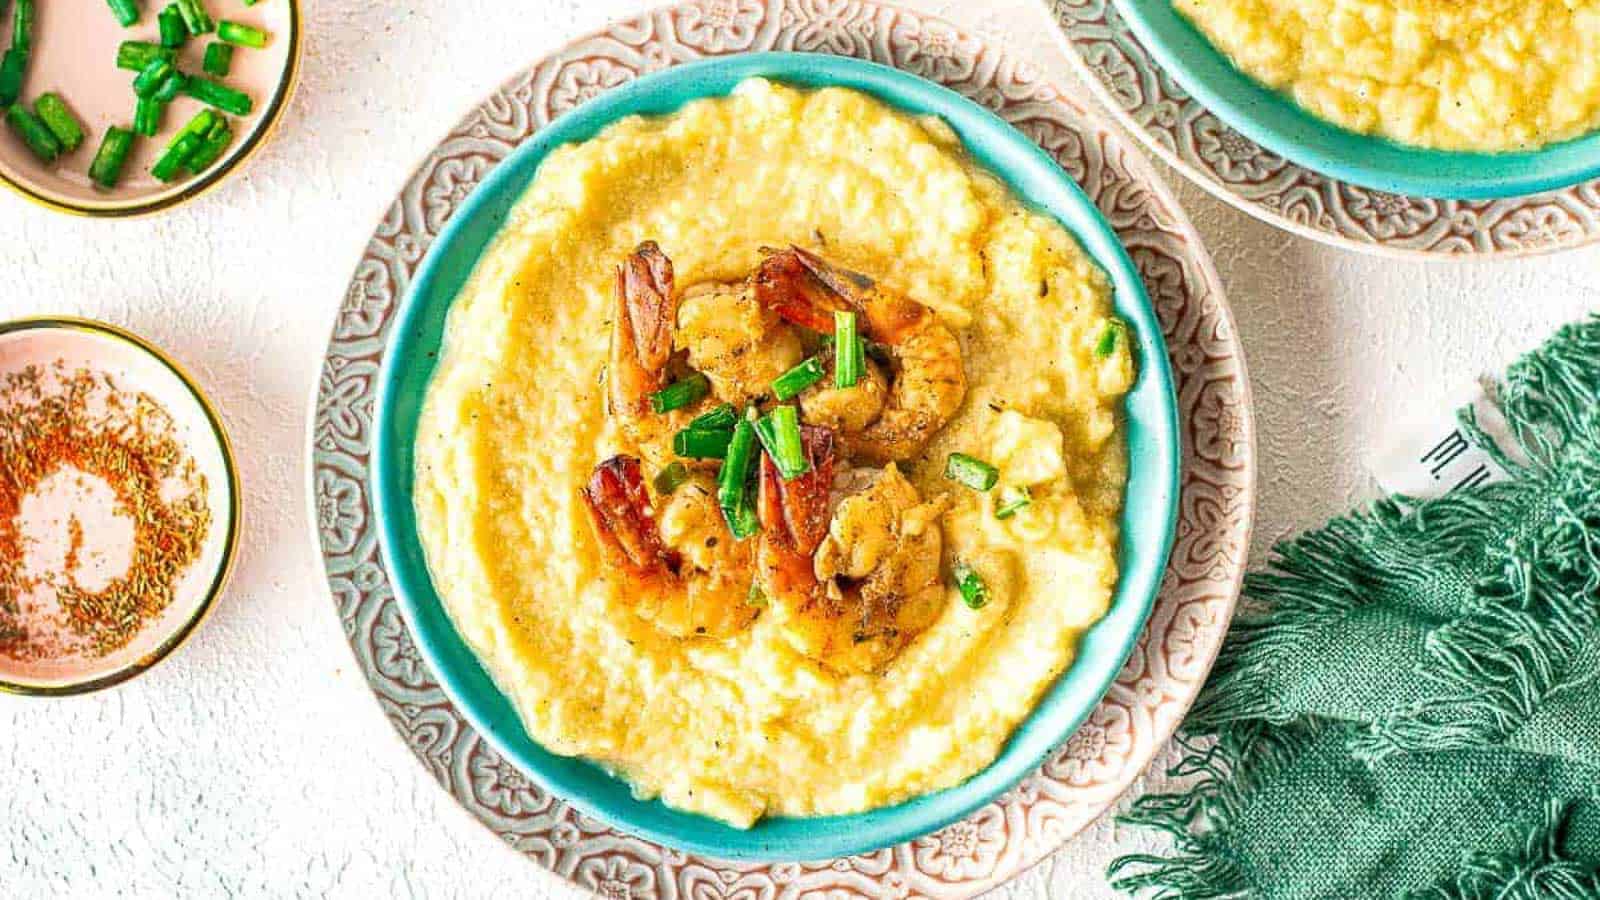 <p>Bring some Southern flair to your table with Cajun Shrimp and Grits. Tender shrimp, flavorful grits, and a hearty sauce combine in this mouthwatering meal that you’ll be eager to recreate for dinner in no time.<br><strong>Get the Recipe: </strong><a href="https://allwaysdelicious.com/cajun-shrimp-and-grits/?utm_source=msn&utm_medium=page&utm_campaign=msn">Cajun Shrimp and Grits</a></p>